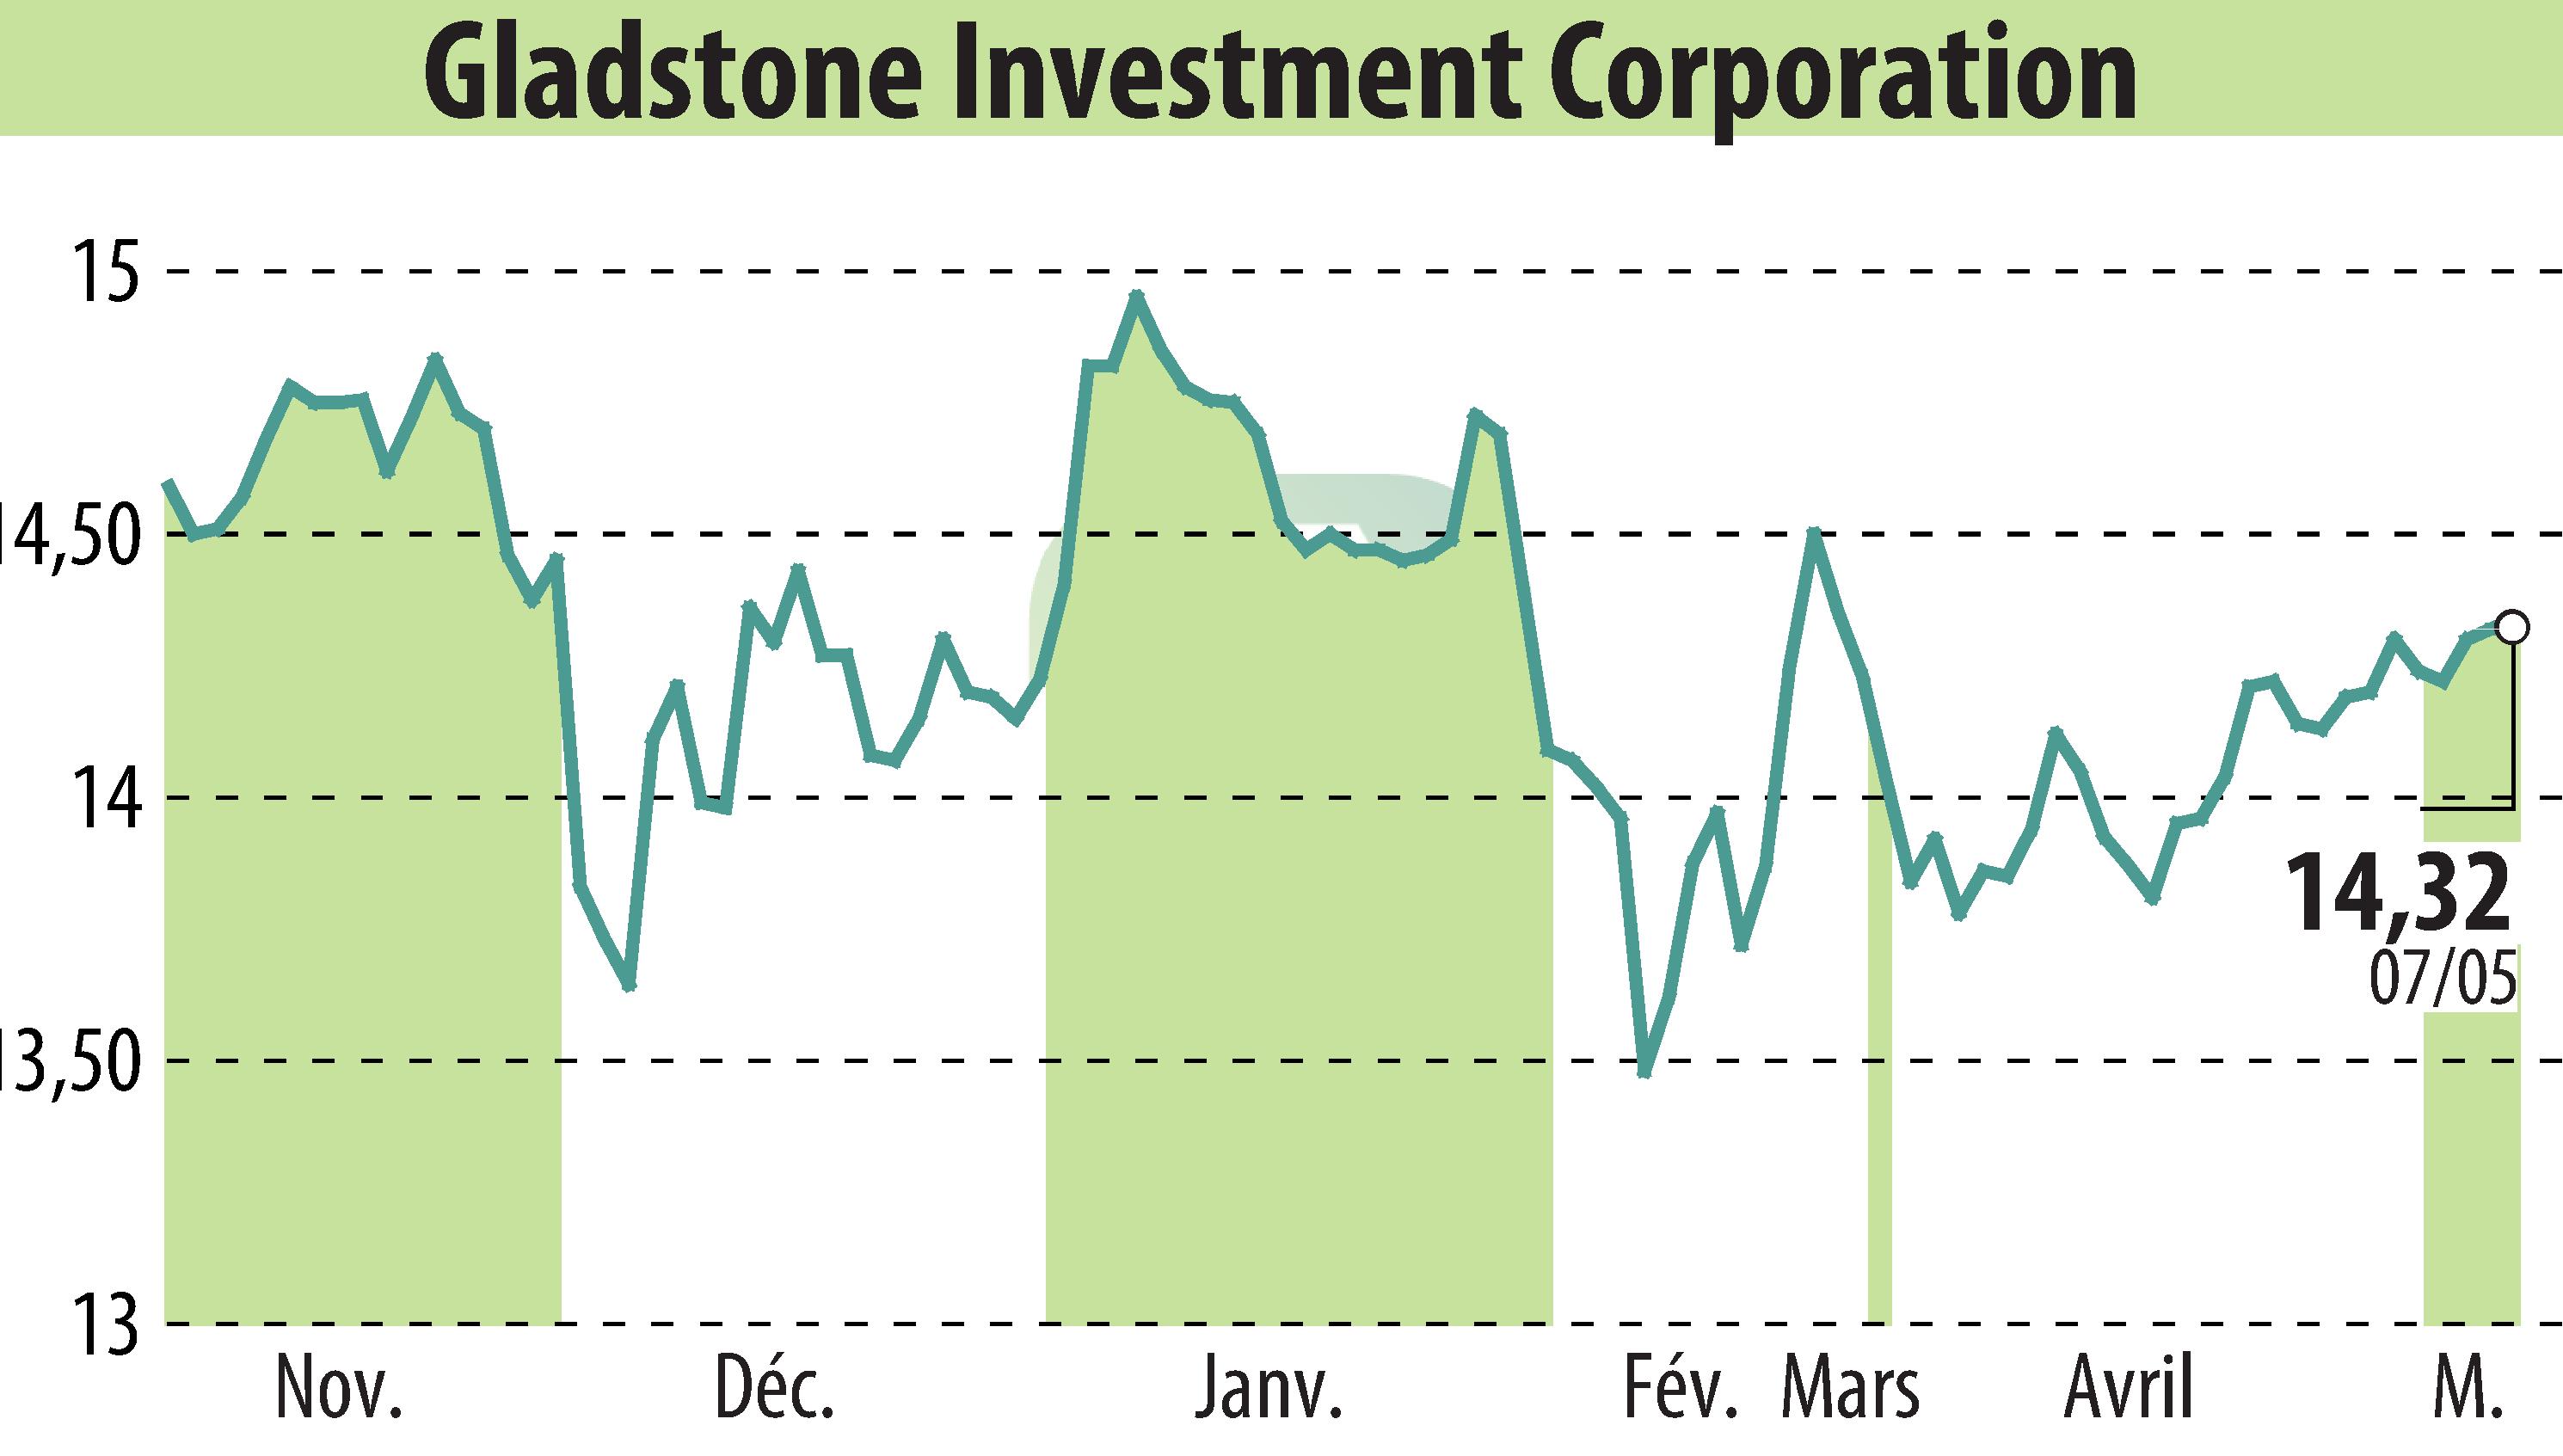 Stock price chart of Gladstone Investment Corporation (EBR:GAIN) showing fluctuations.